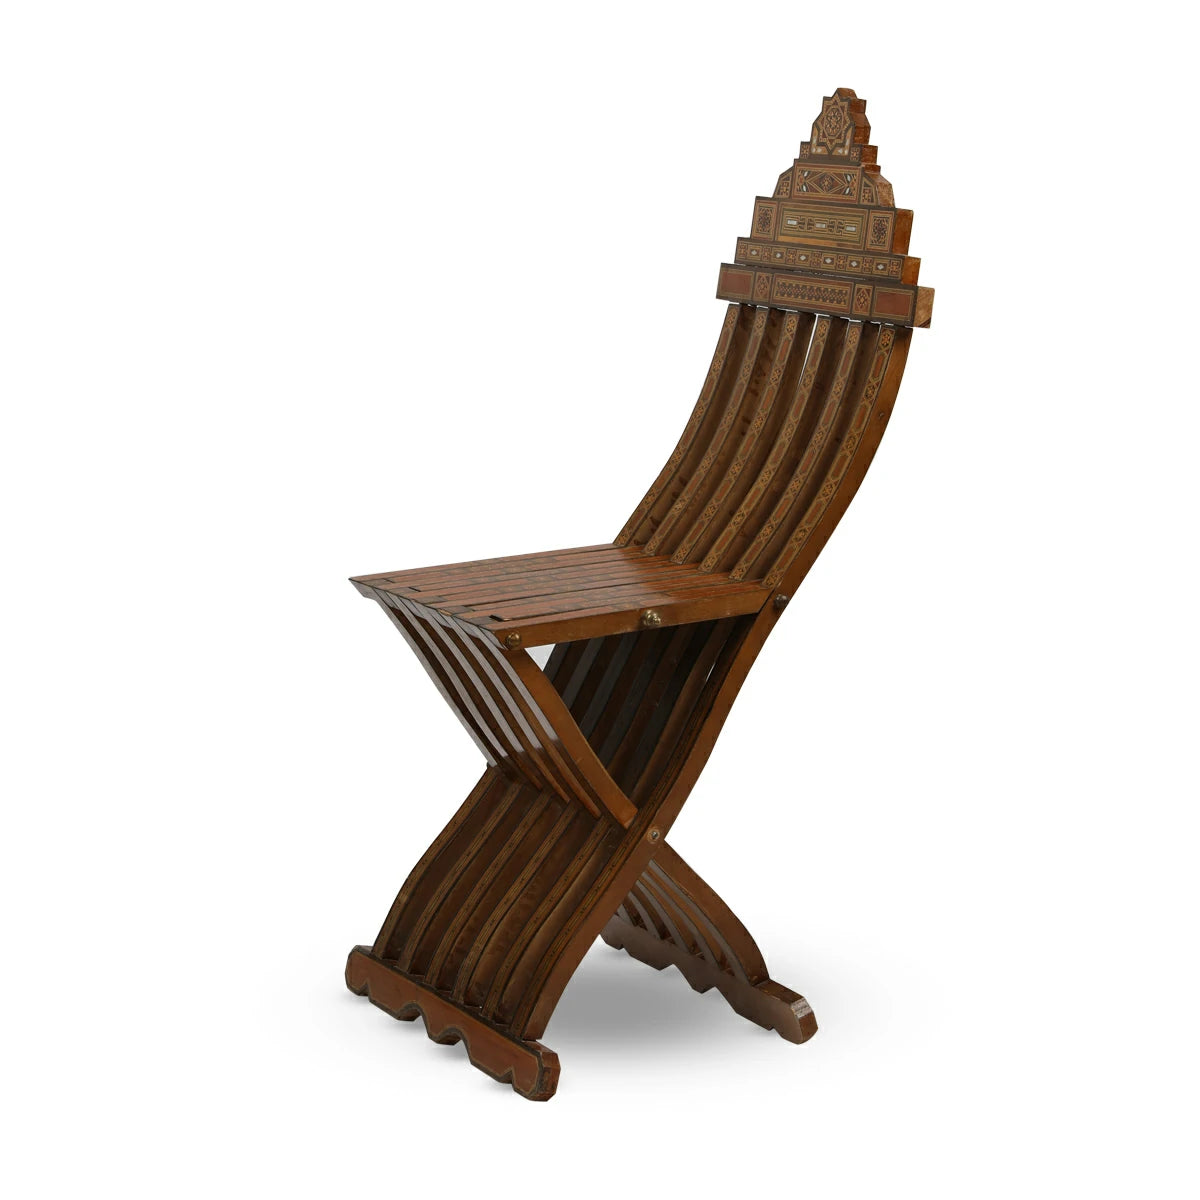 Hand-Crafted Marquetry & Mother of Pearl Inlaid Foldable Arabian Flat Wood Chair